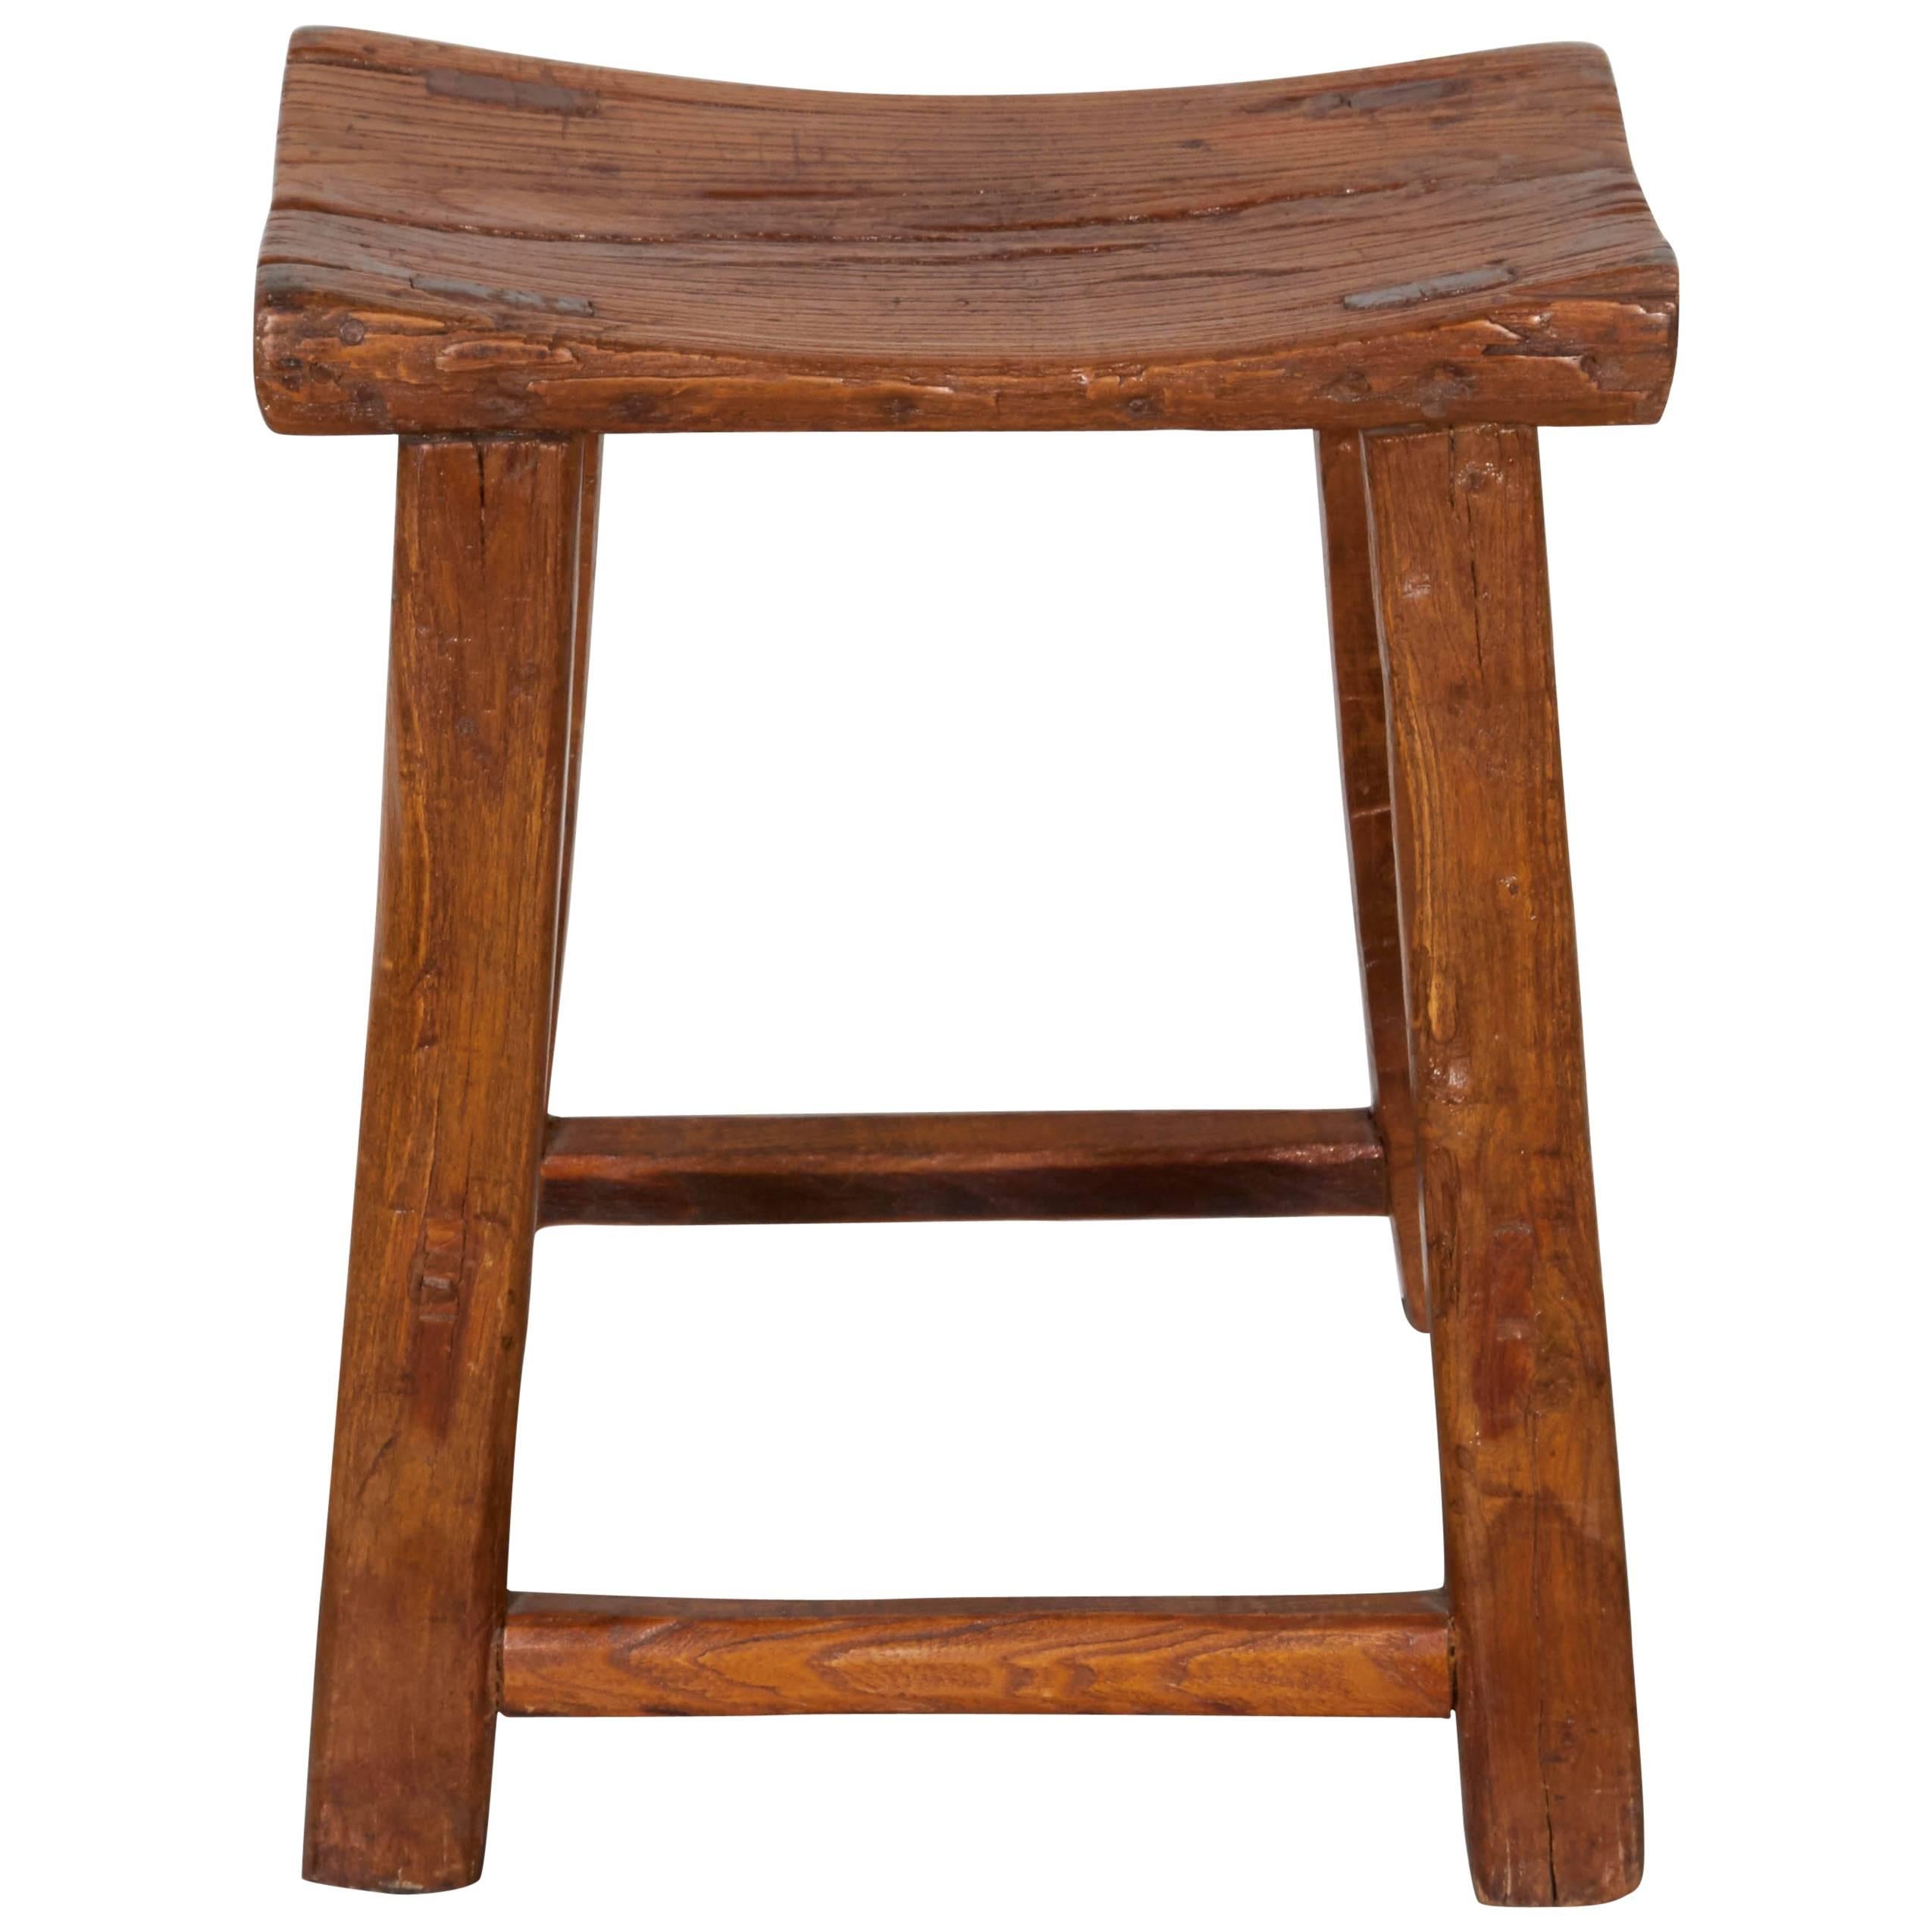 Classic Antique Chinese Stool